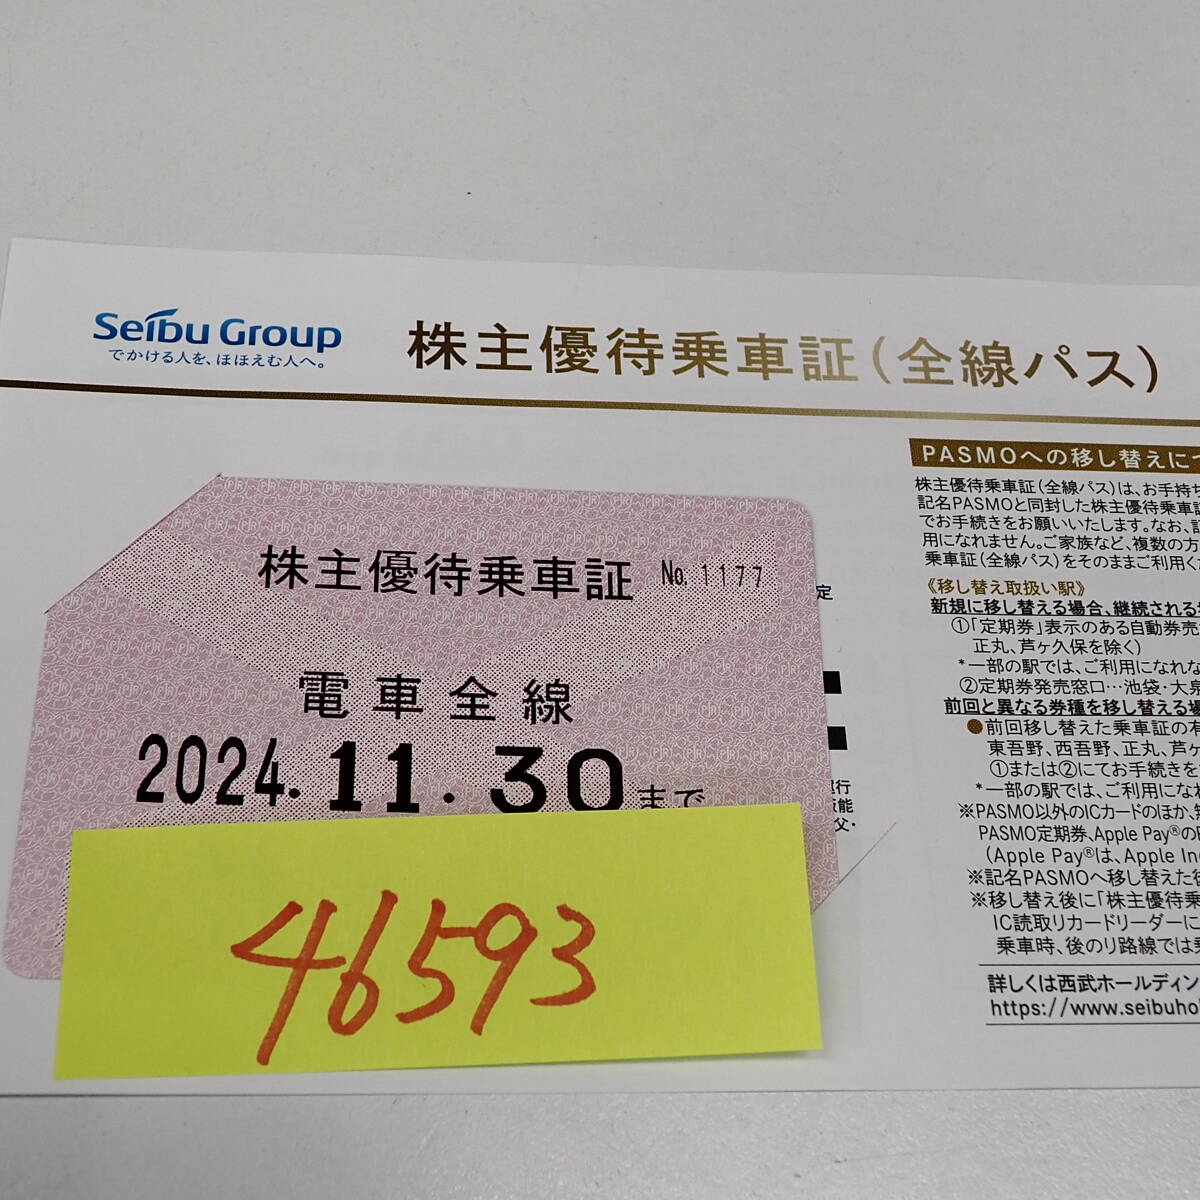 46593- free shipping [ Seibu railroad stockholder hospitality get into car proof ] train all line / fixed period type / have efficacy time limit 2024 year 11 month 30 day man name title mistake therefore re-exhibition did 